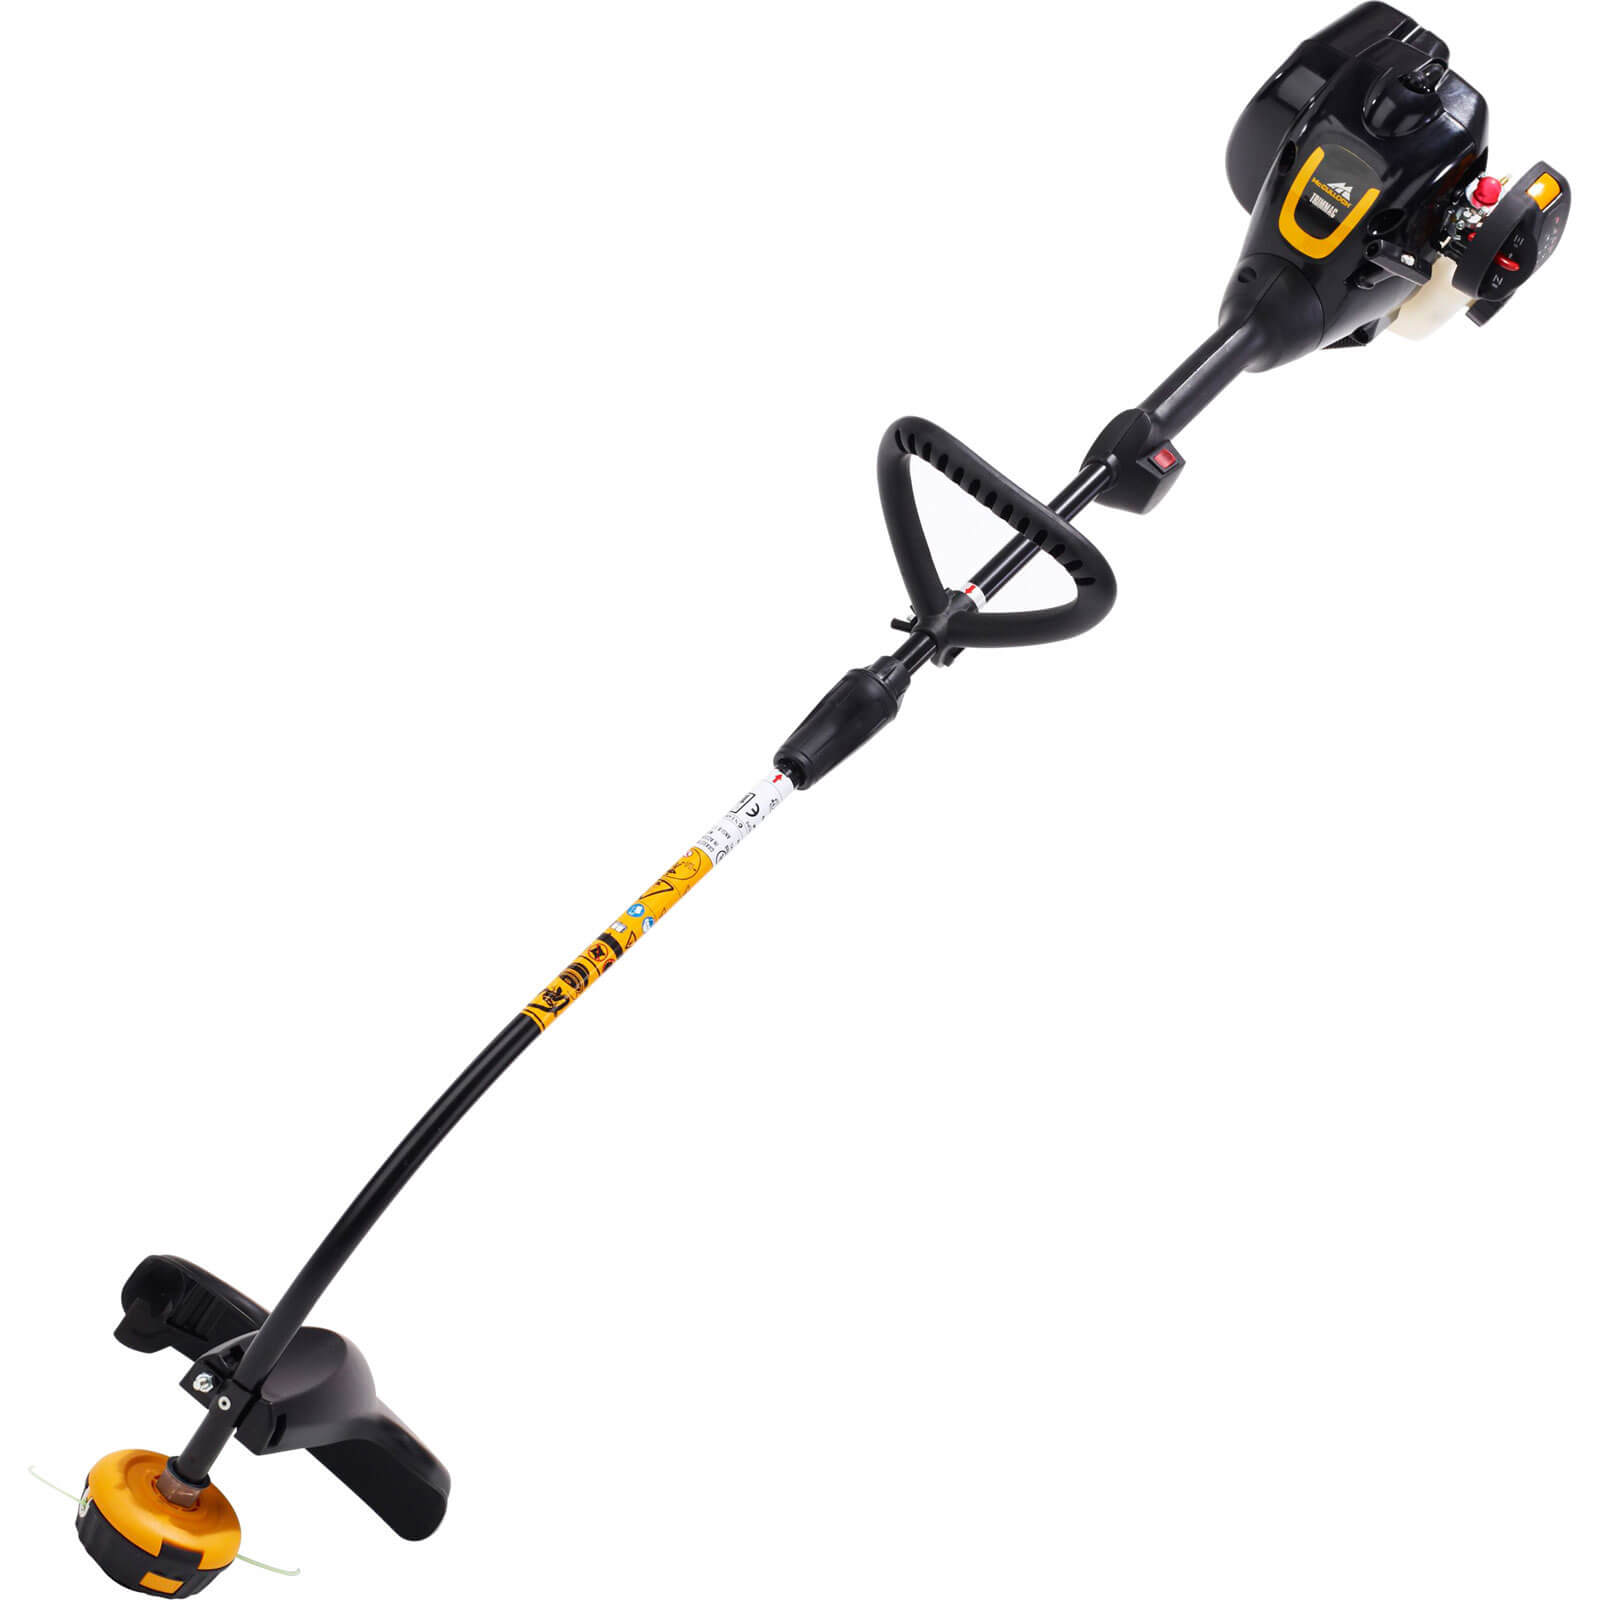 Photo of Mcculloch Trimmac Petrol Grass Trimmer 410mm